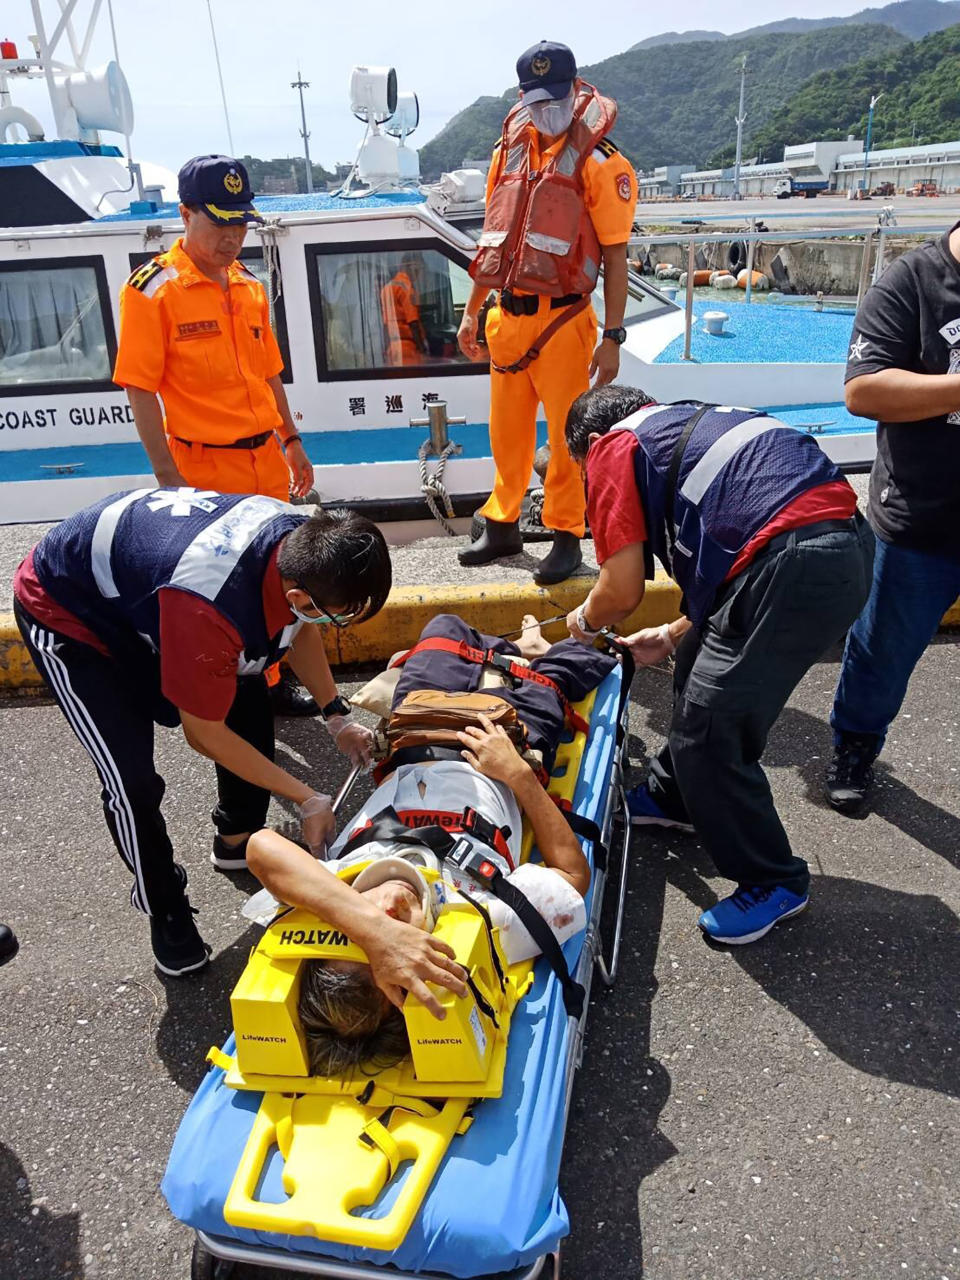 An injured people lies on stretcher at the site of a collapsed bridge in Nanfangao, eastern Taiwan. Tuesday, Oct. 1, 2019. A towering bridge over a bay in eastern Taiwan has collapsed sending an oil tanker truck falling onto boats in the water below. A disaster relief official said the collapse set off a fire and at least 10 people have been hurt. (Taiwan's Coast Guard via AP)